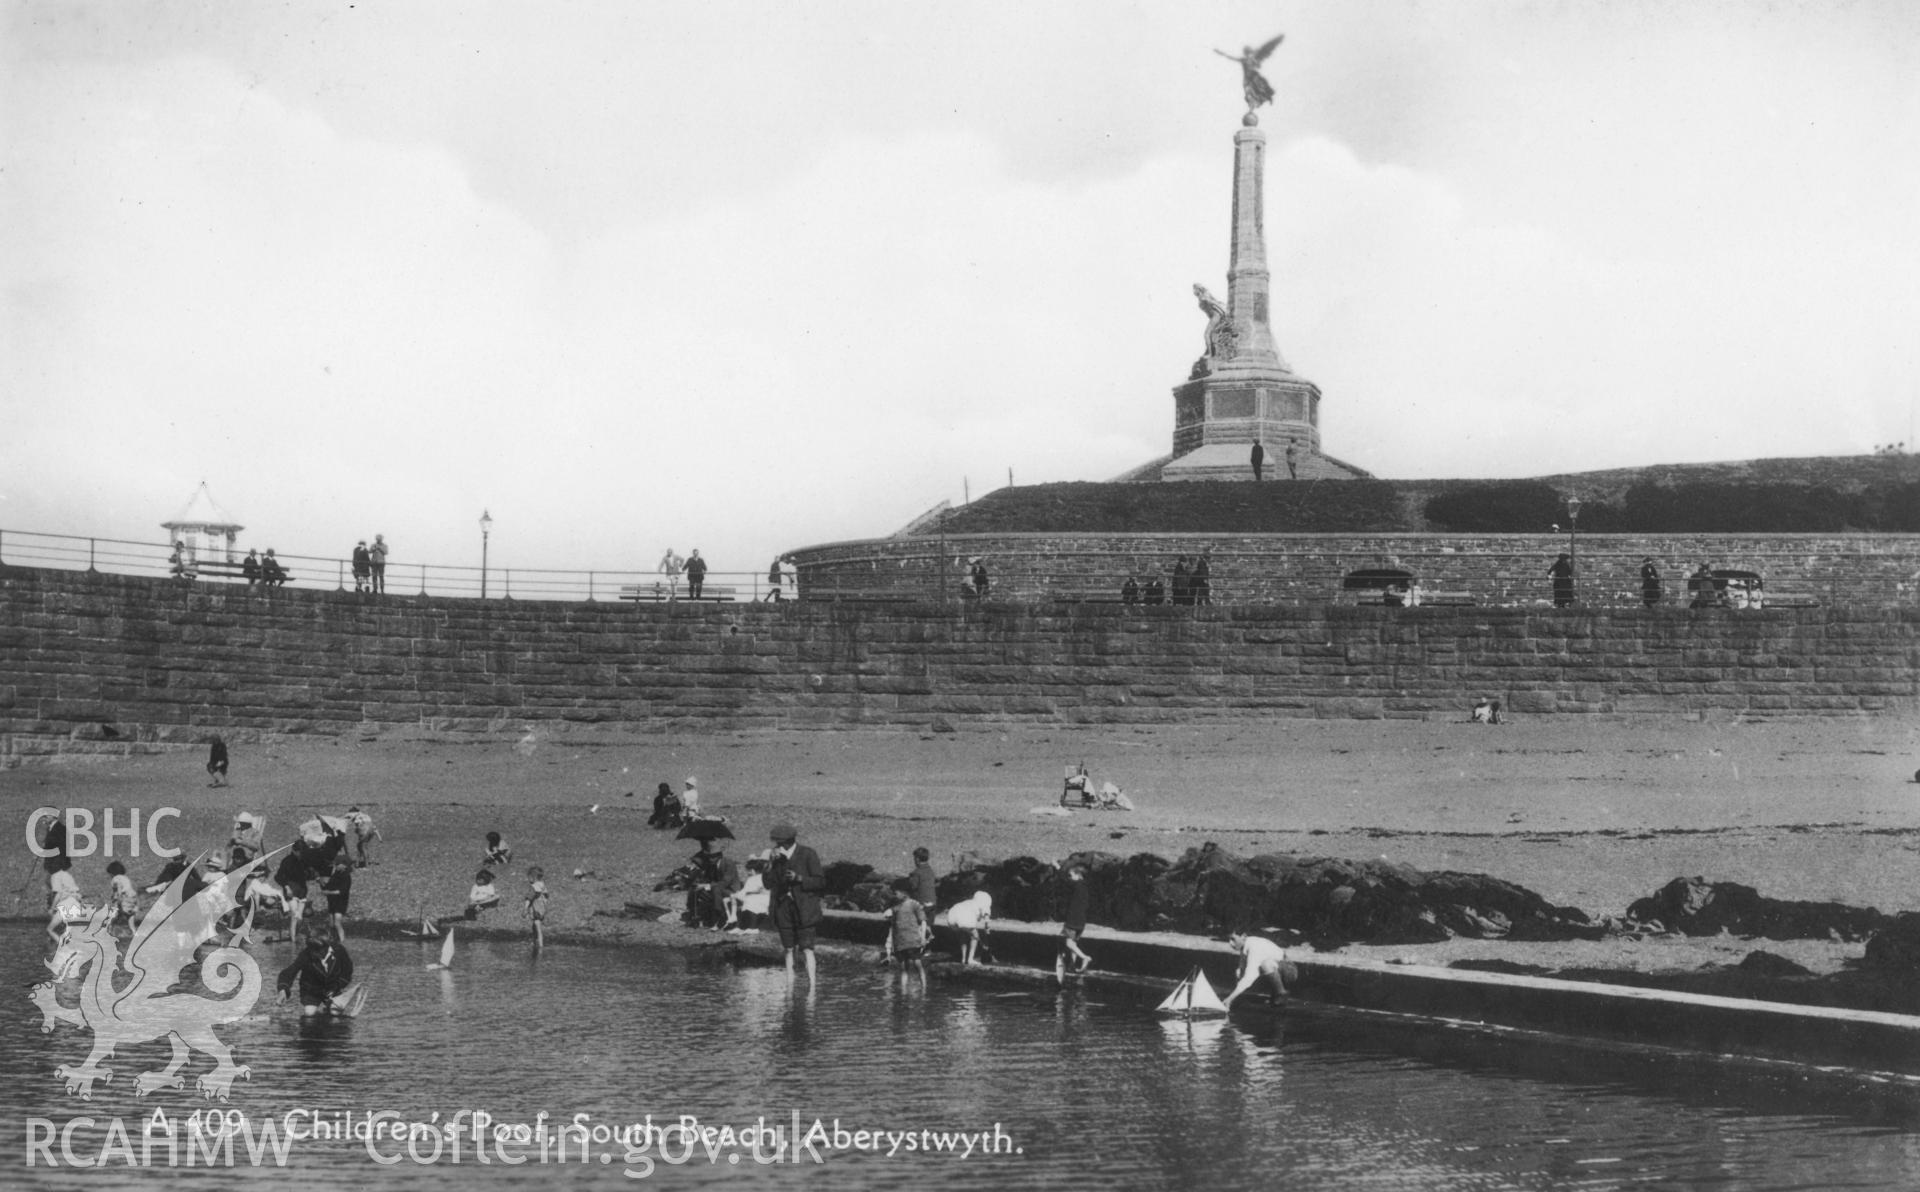 Digital copy of postcard showing Children's Pool, South Beach, Aberystwyth, dated c. 1930s (Publisher: E T W Dennis & Son).  Loaned for copying by Charlie Downes.